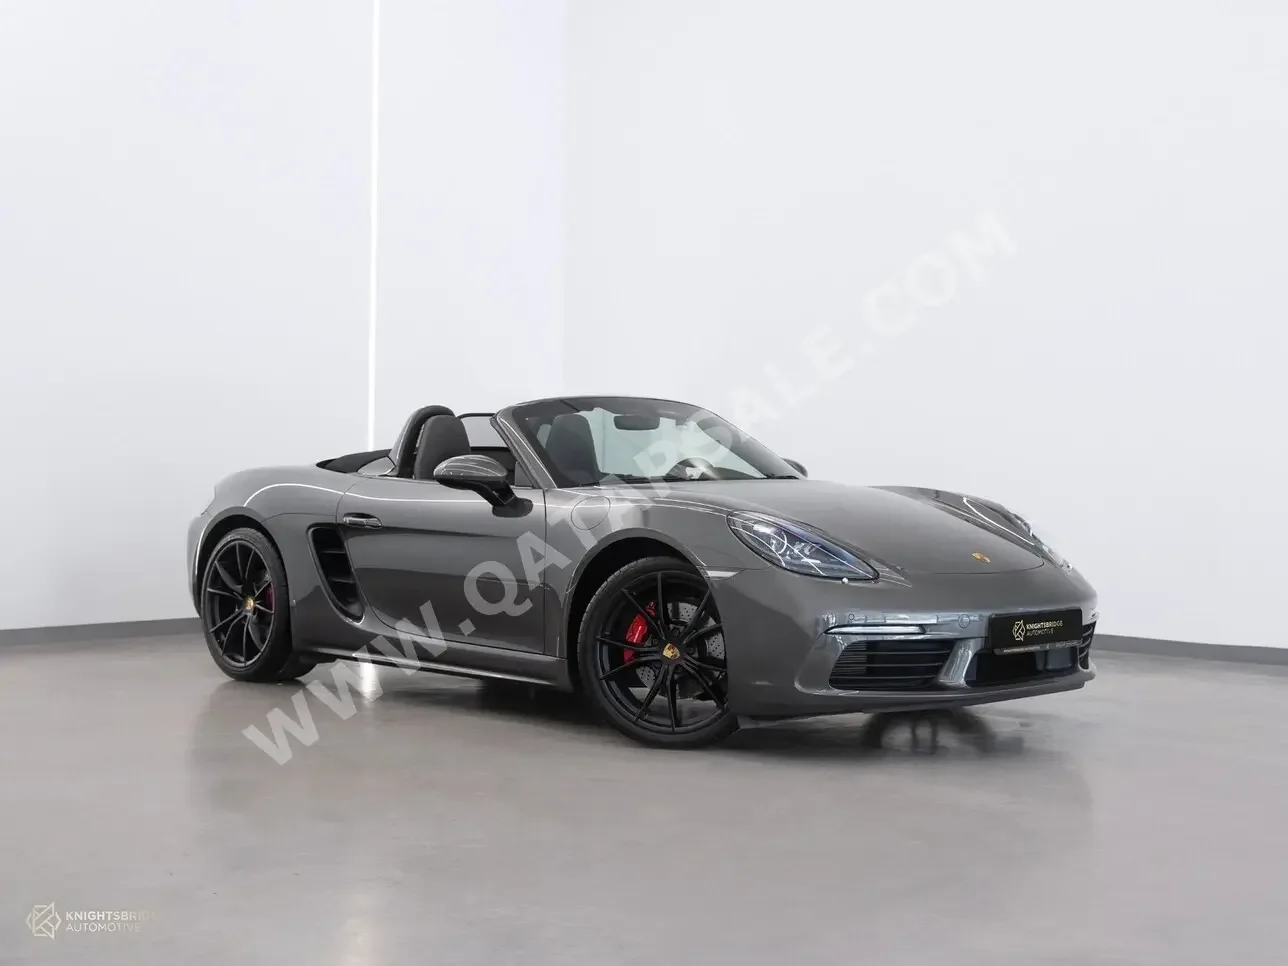 Porsche  Boxster  2017  Automatic  30,000 Km  4 Cylinder  Rear Wheel Drive (RWD)  Convertible  Gray  With Warranty